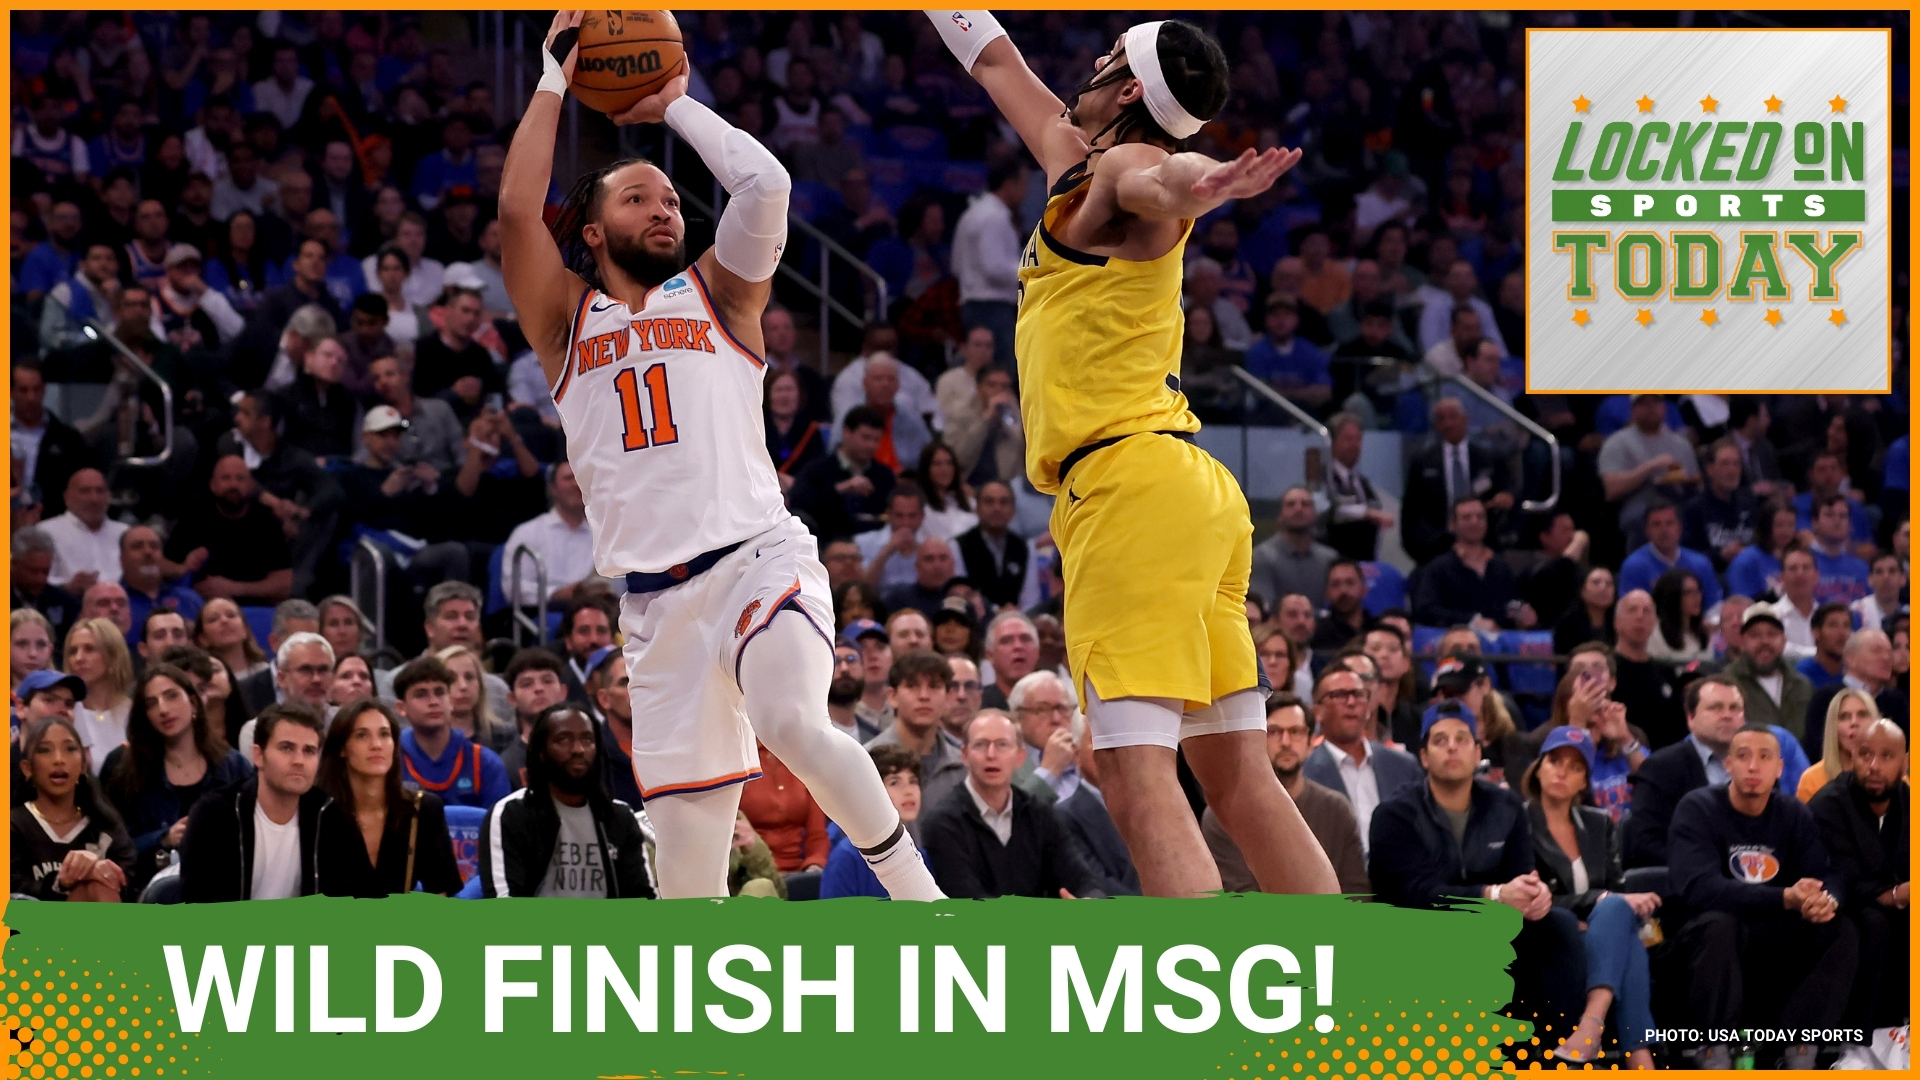 The Indiana Pacers and New York Knicks rekindled their rivalry with a trip to the NBA Playoffs Conference Finals on the line, and more.